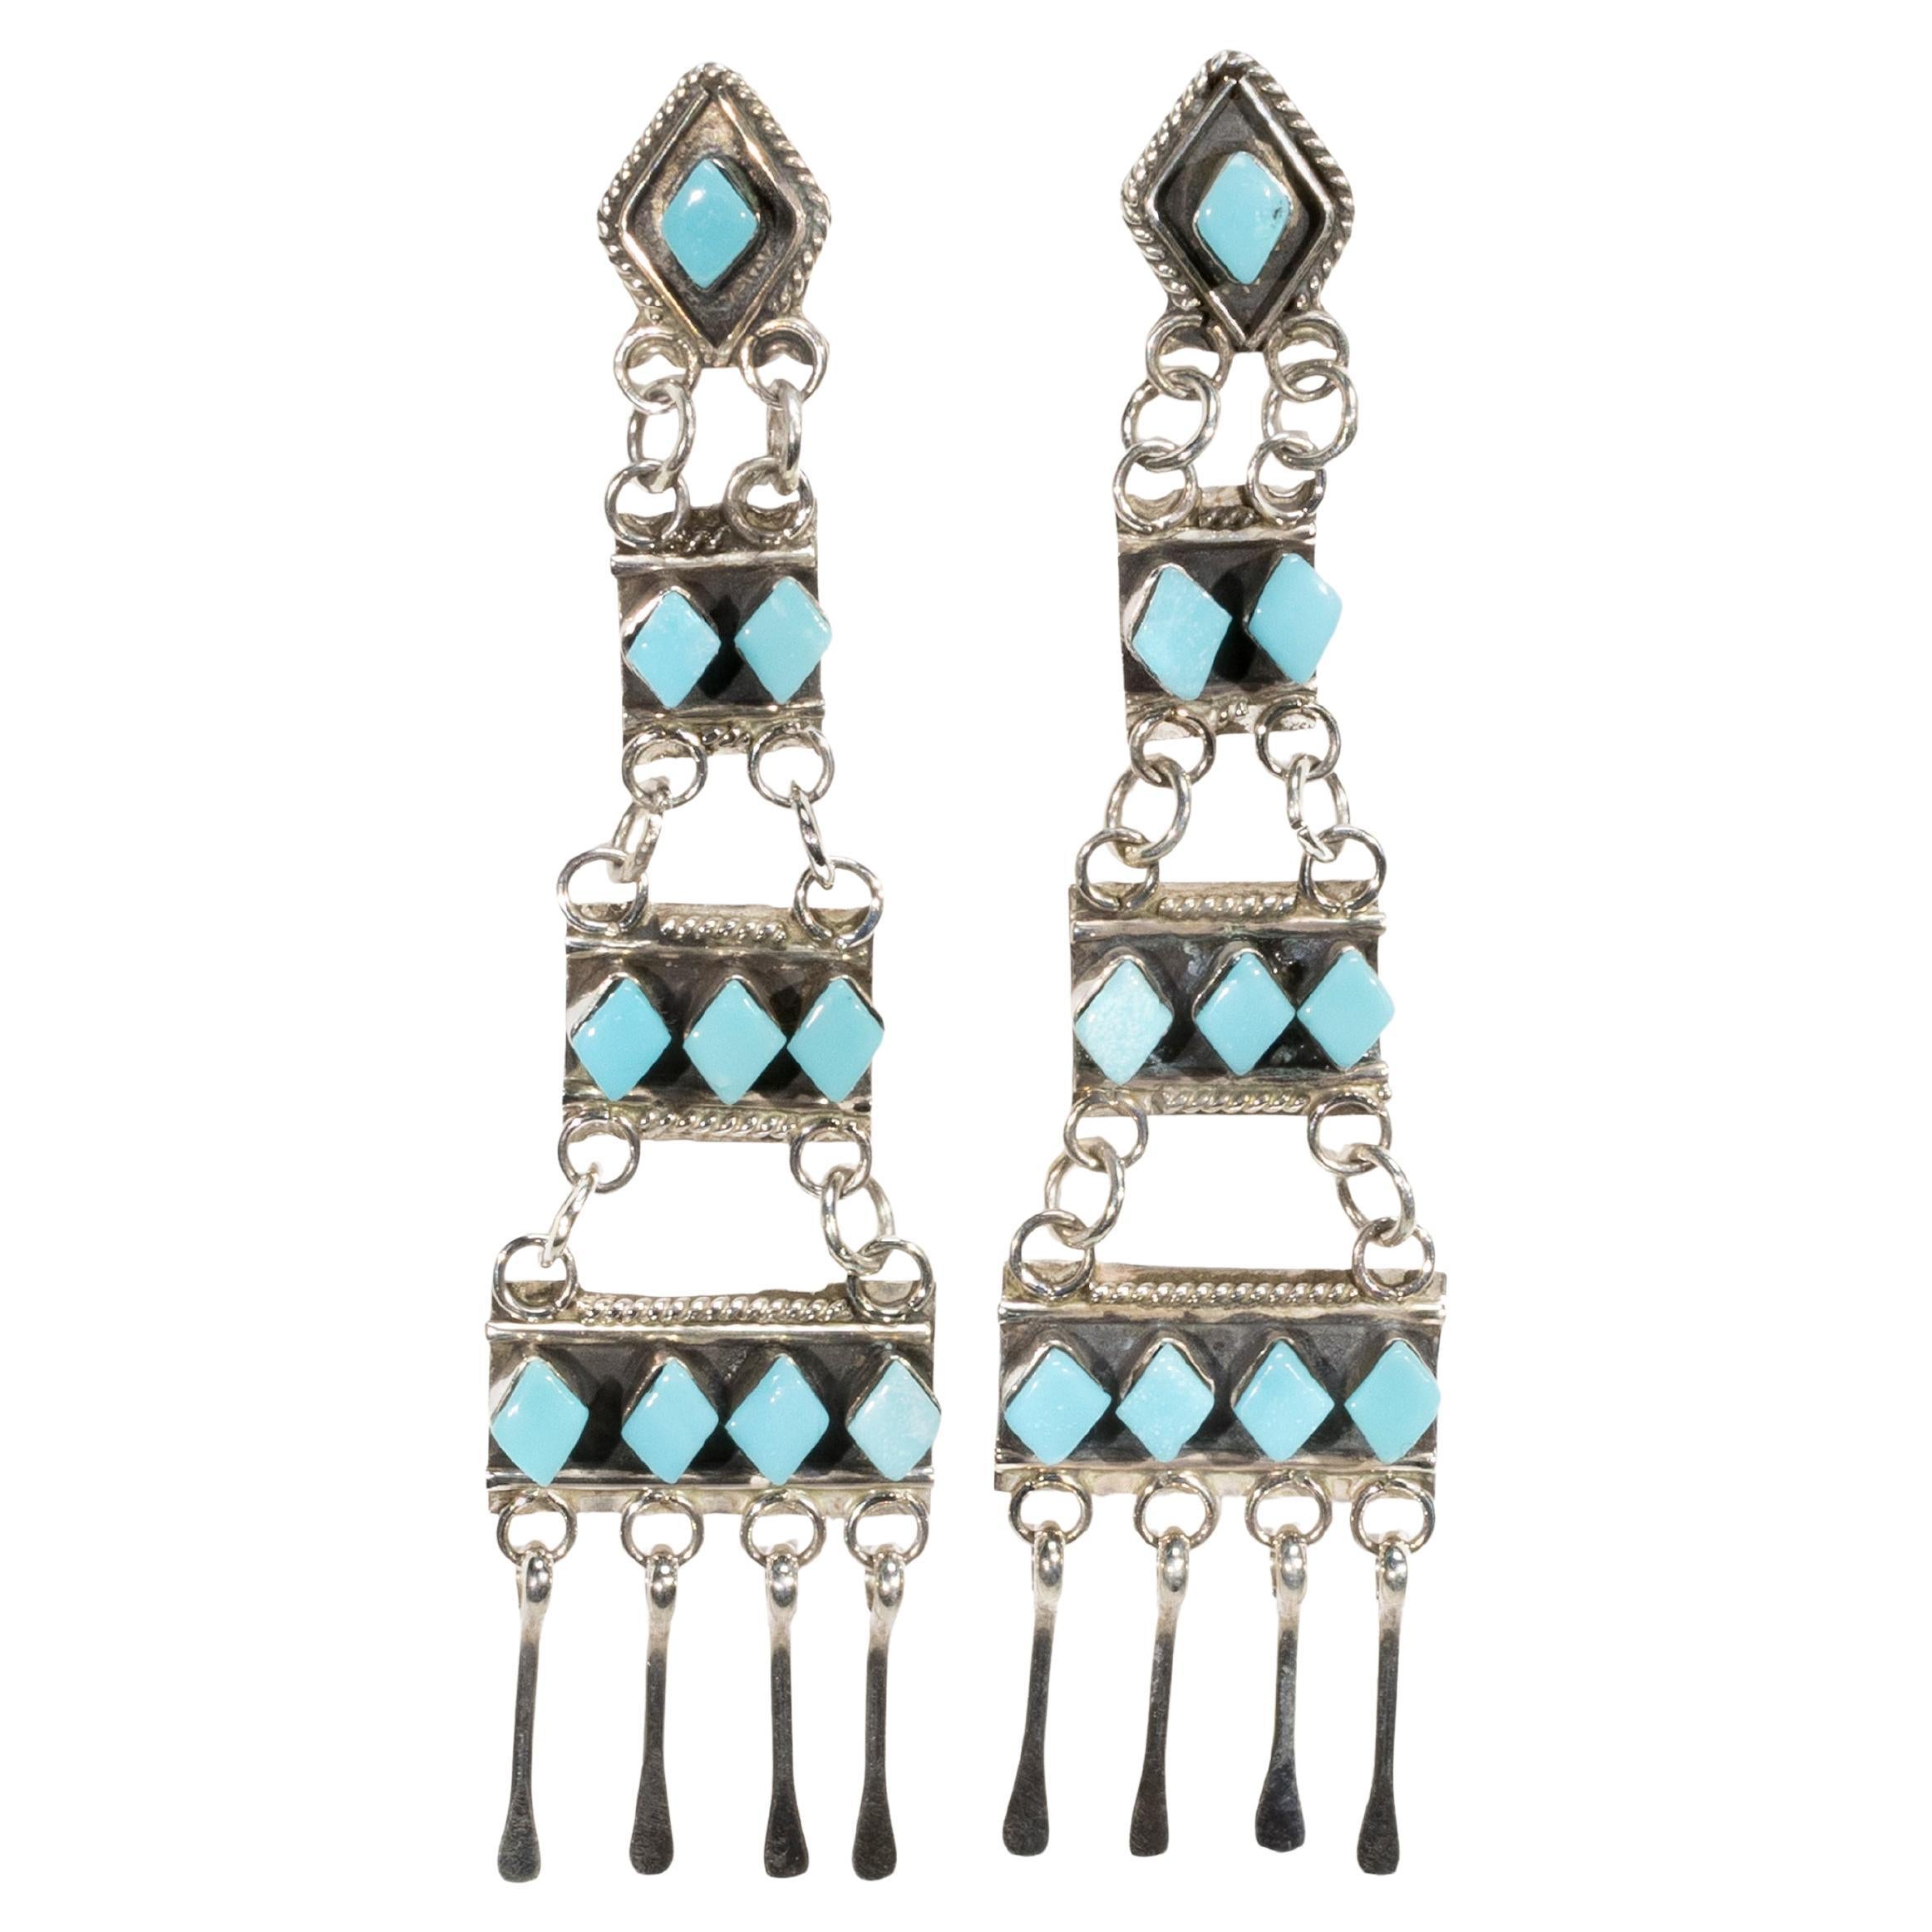 Zuni Sleeping Beauty Turquoise and Sterling Earrings